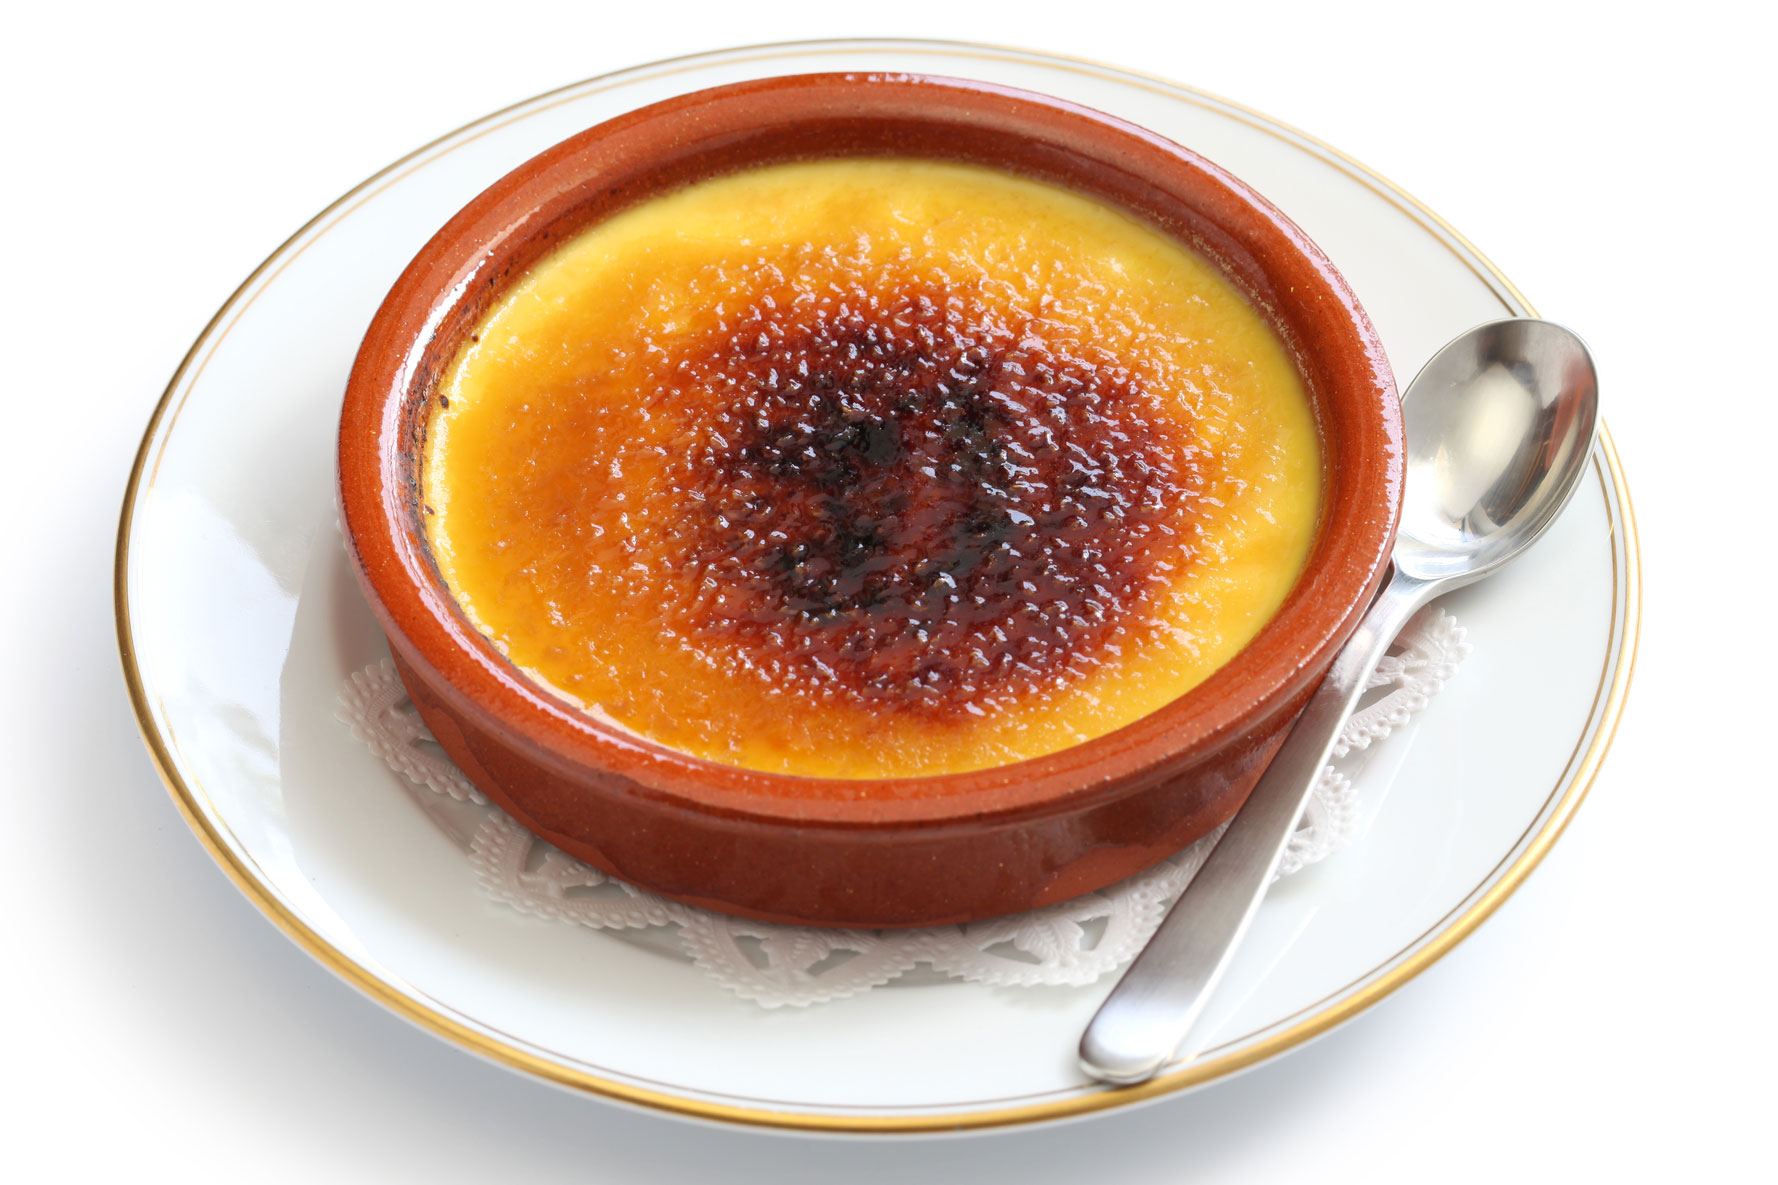 It is possible to make Creme Brullee in your campervan, try my easy recipe